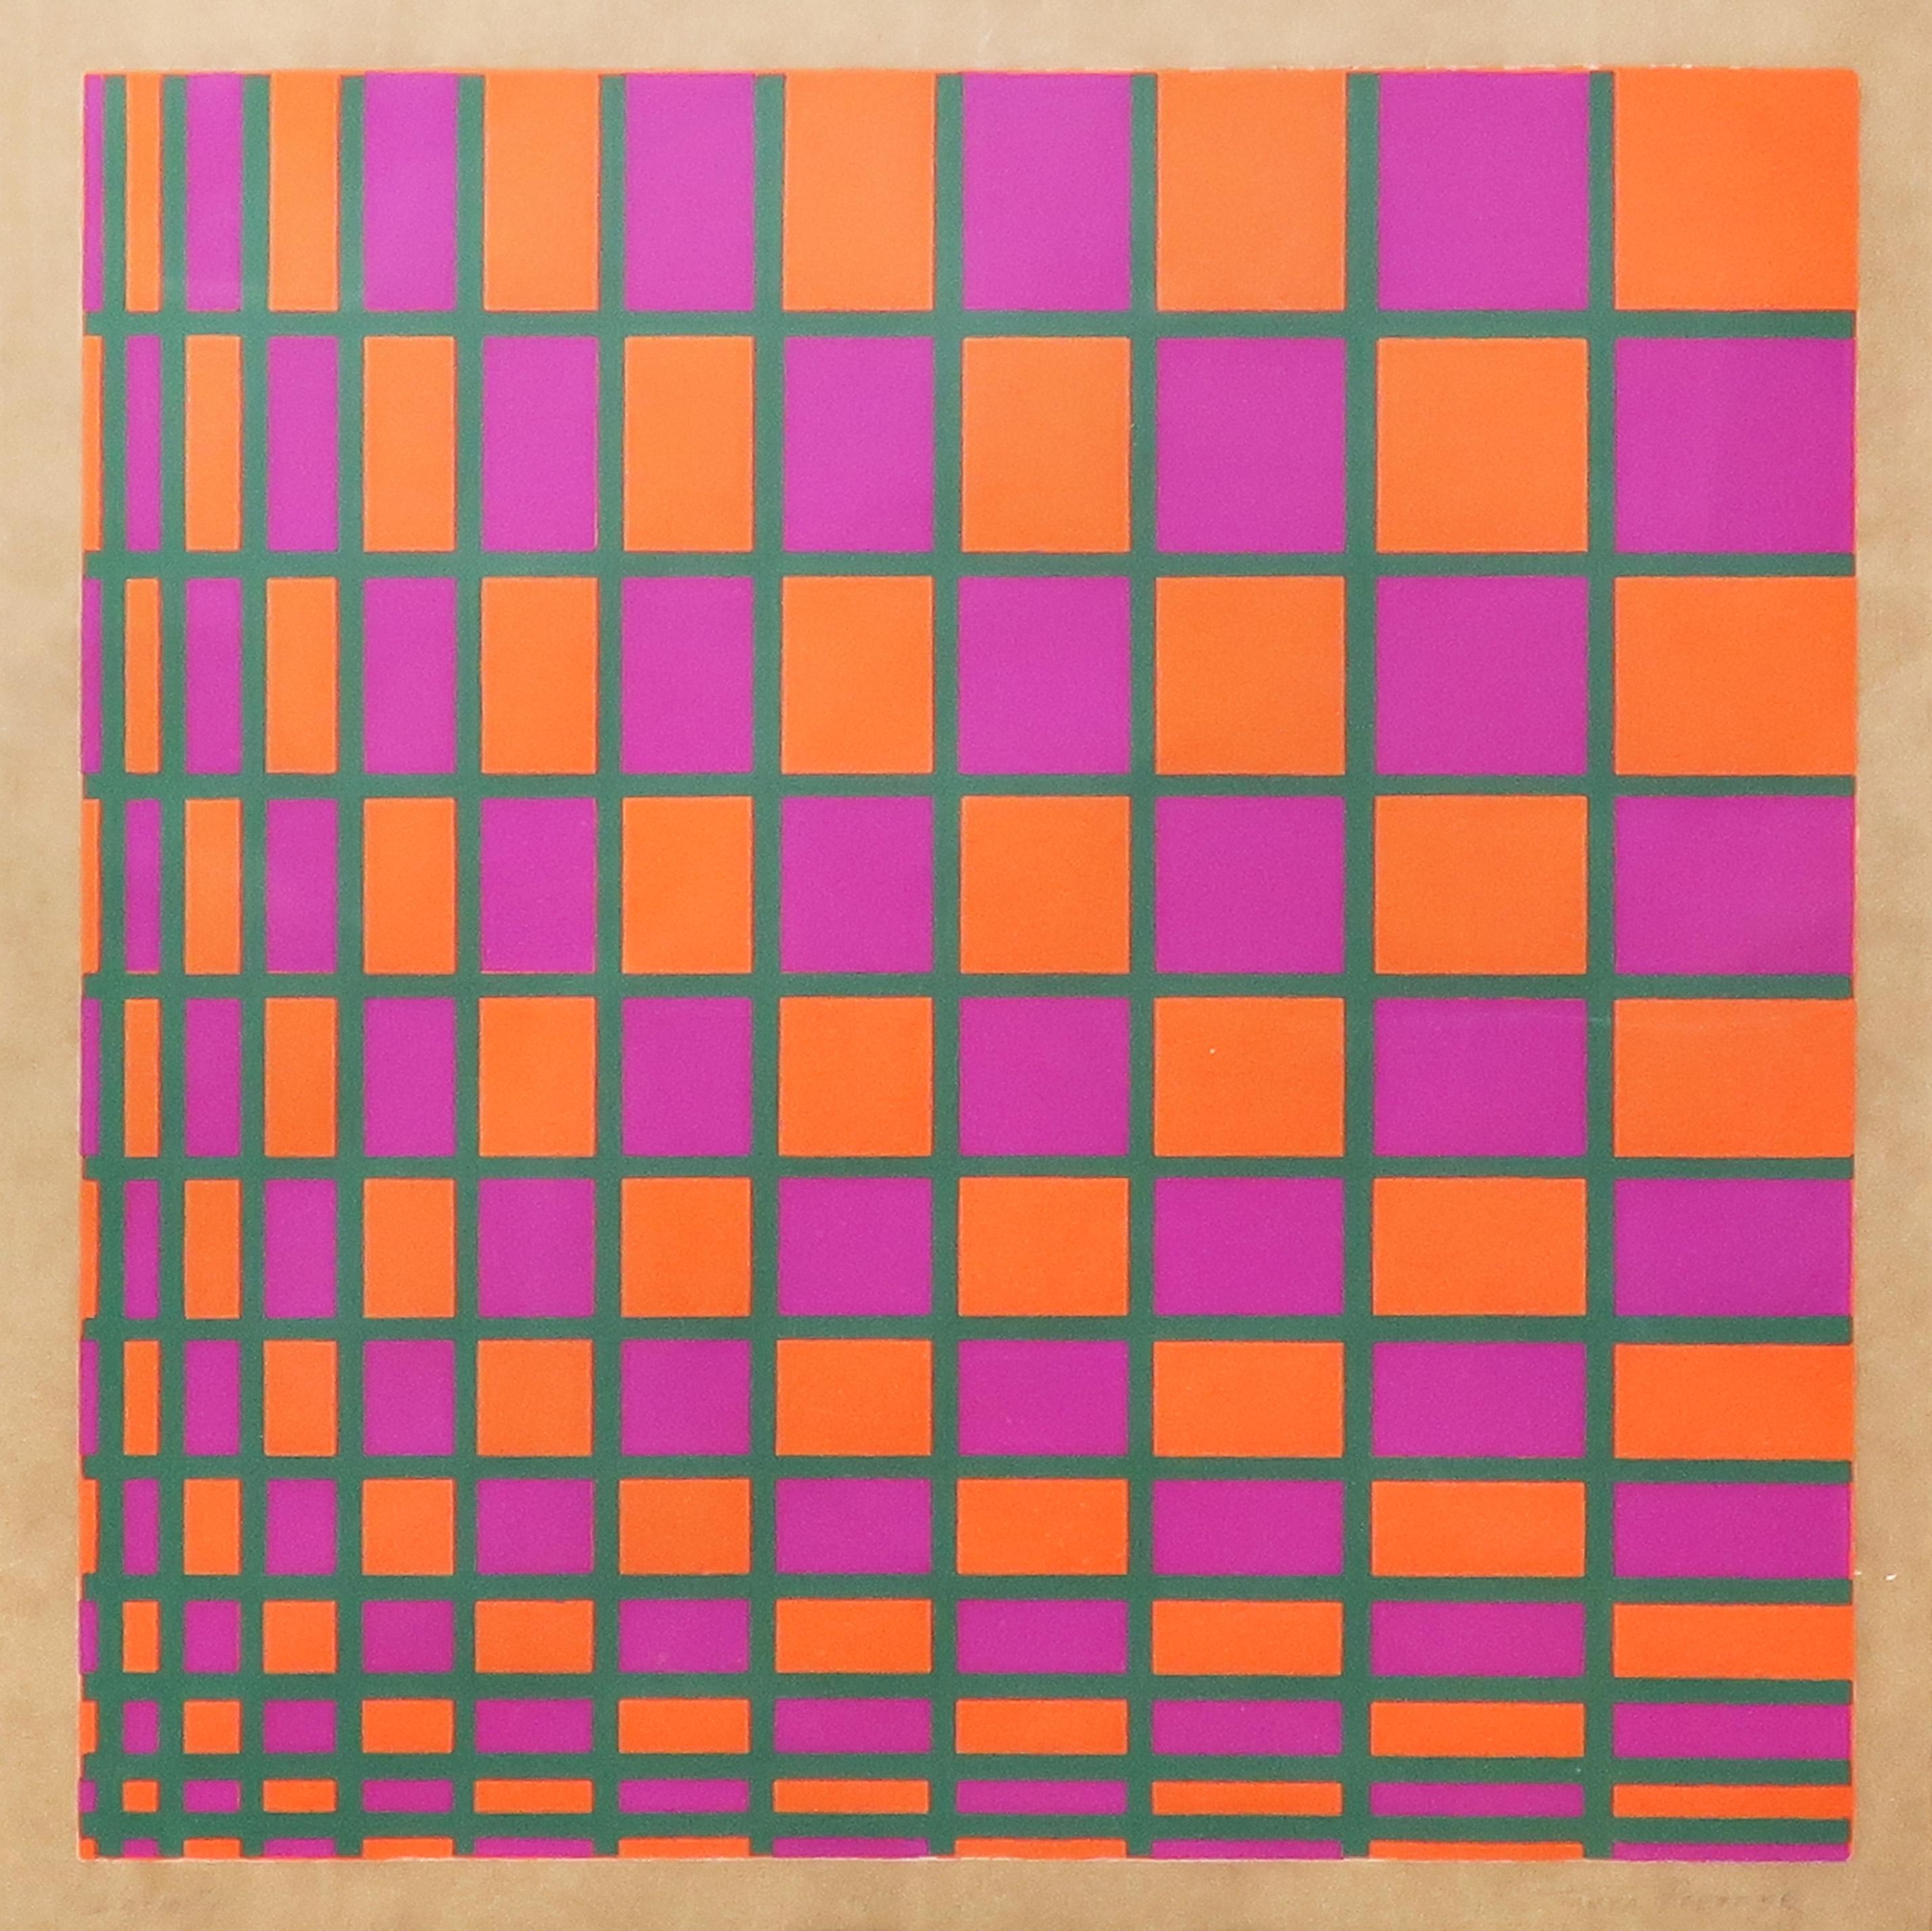 A lovely Op Art painting on brown paper by Tanya Pfeffer, likely from the 1970s. Orange and pink squares separated by greenish gray lines in descending size from right to left. In a white painted metal frame with off-white matte. Signed in pencil by